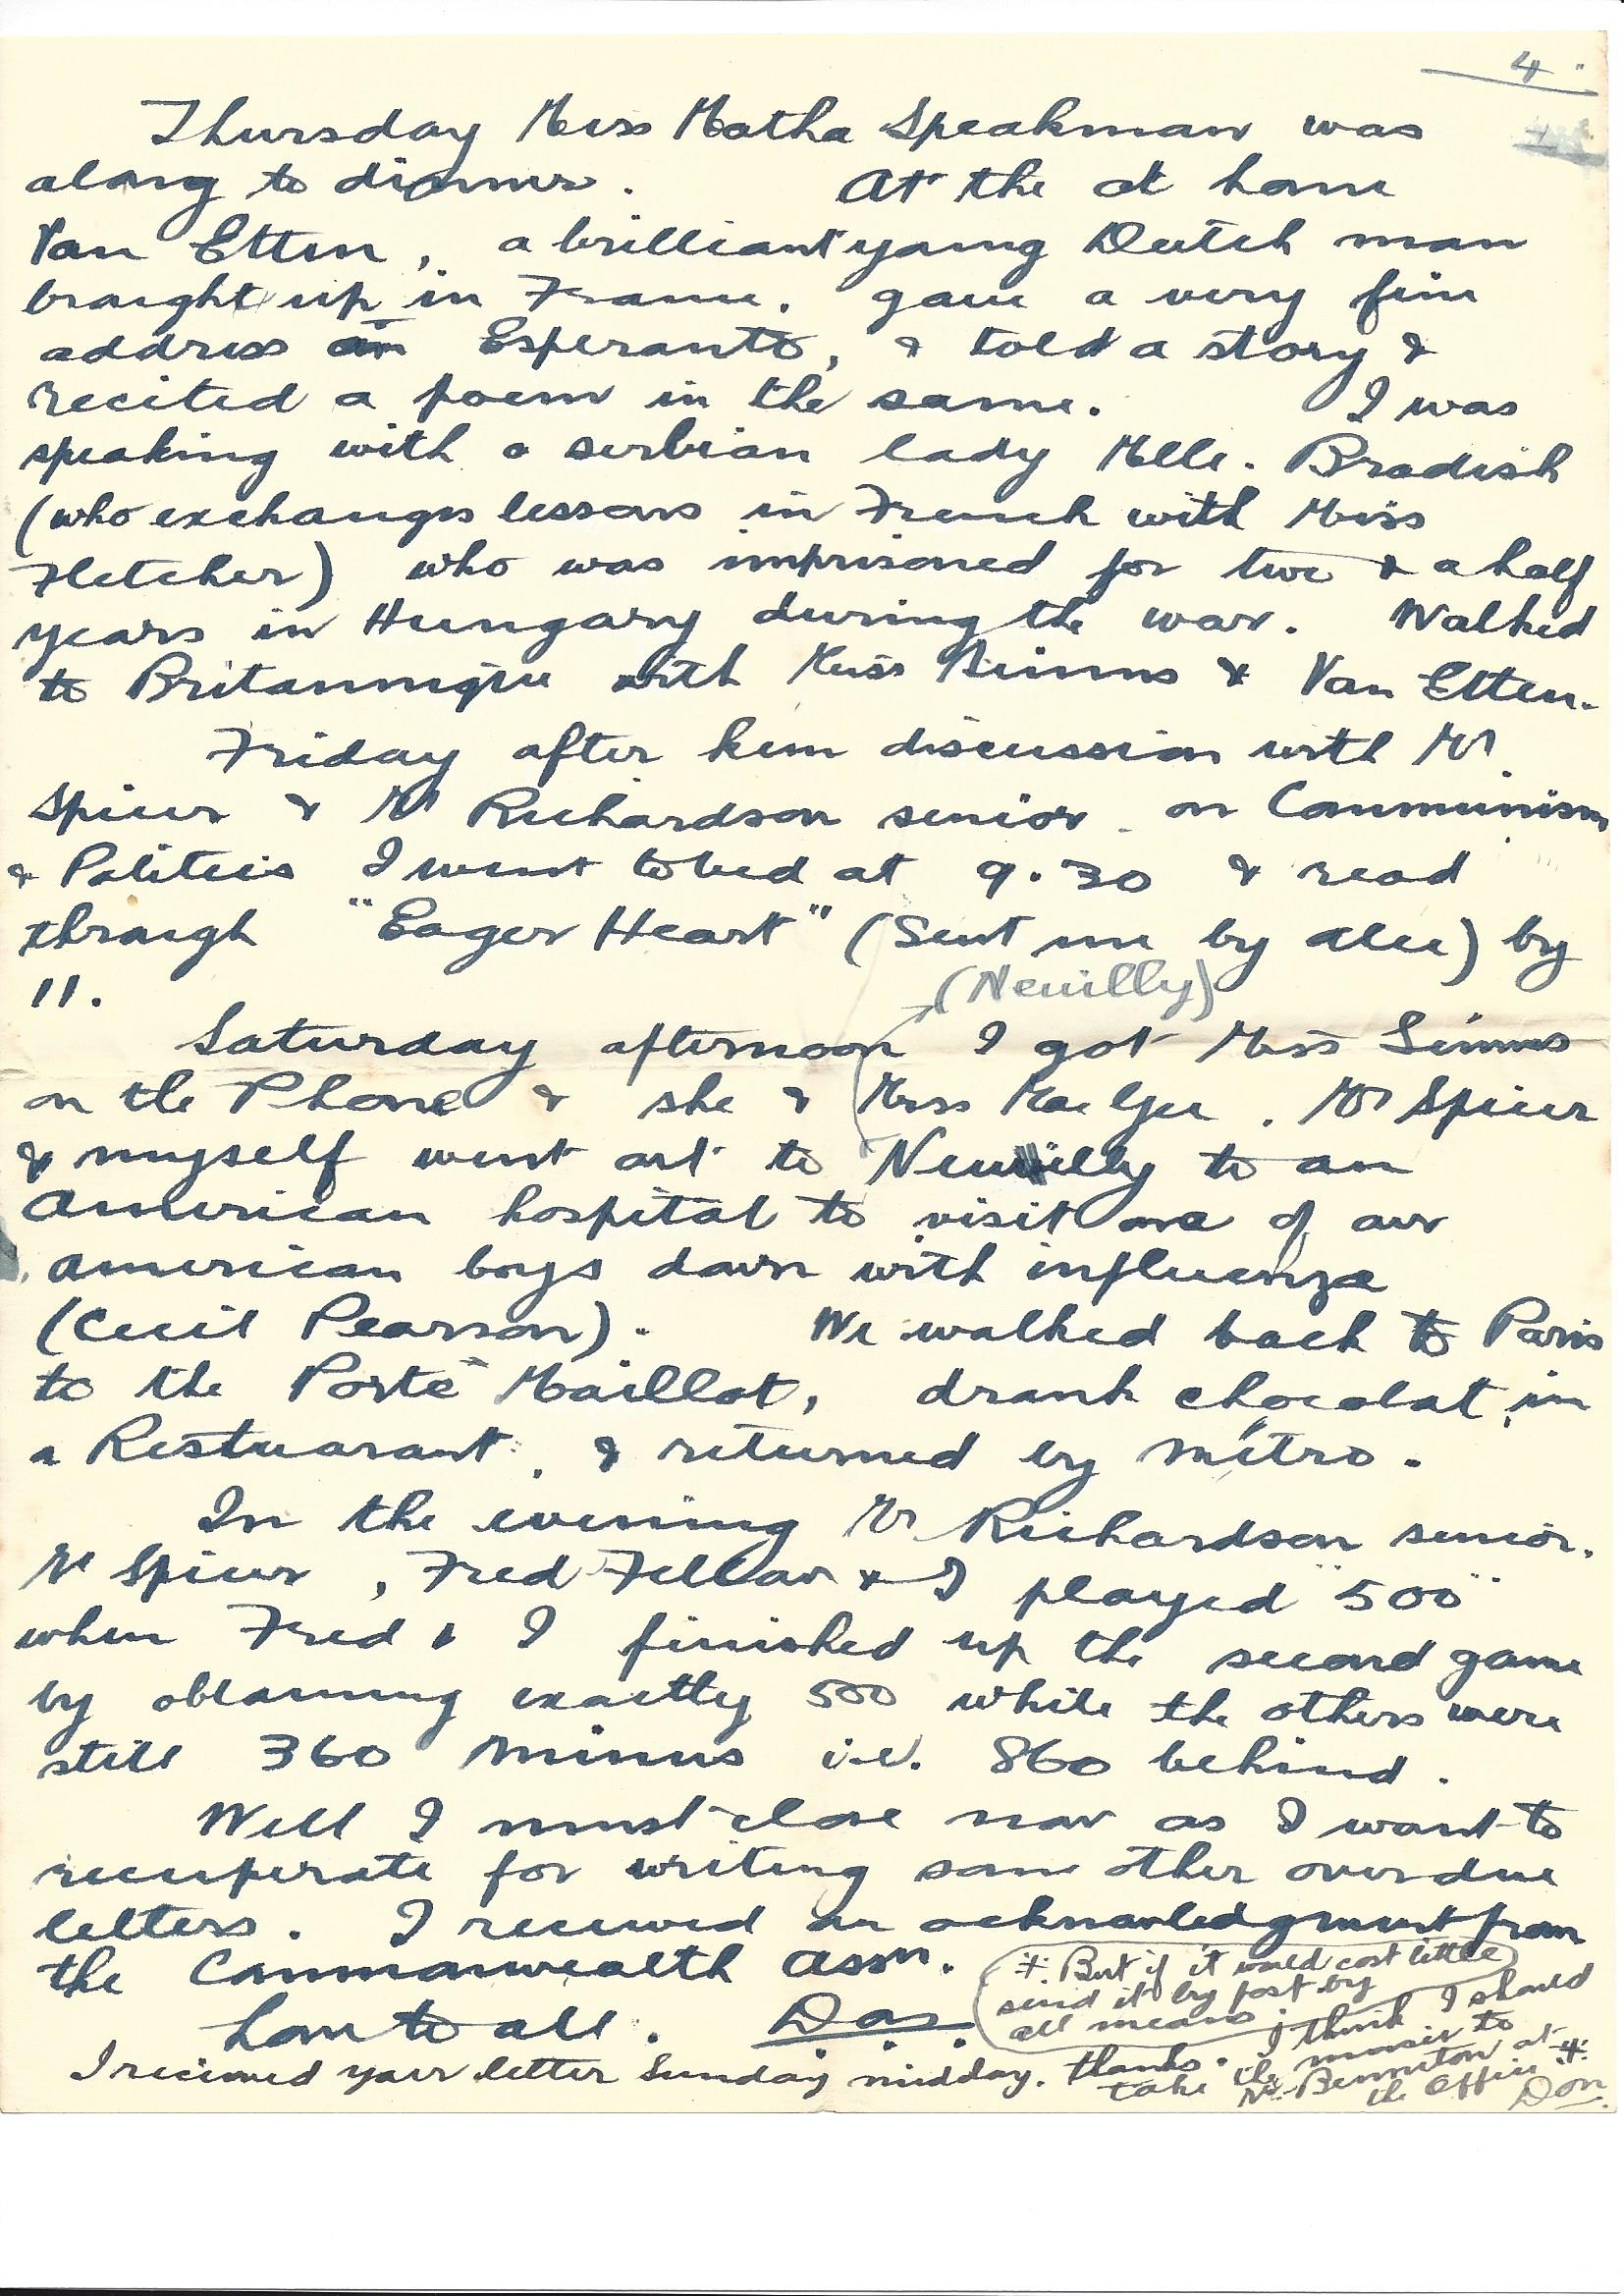 1920-01-25 page 5 letter by Donald Bearman